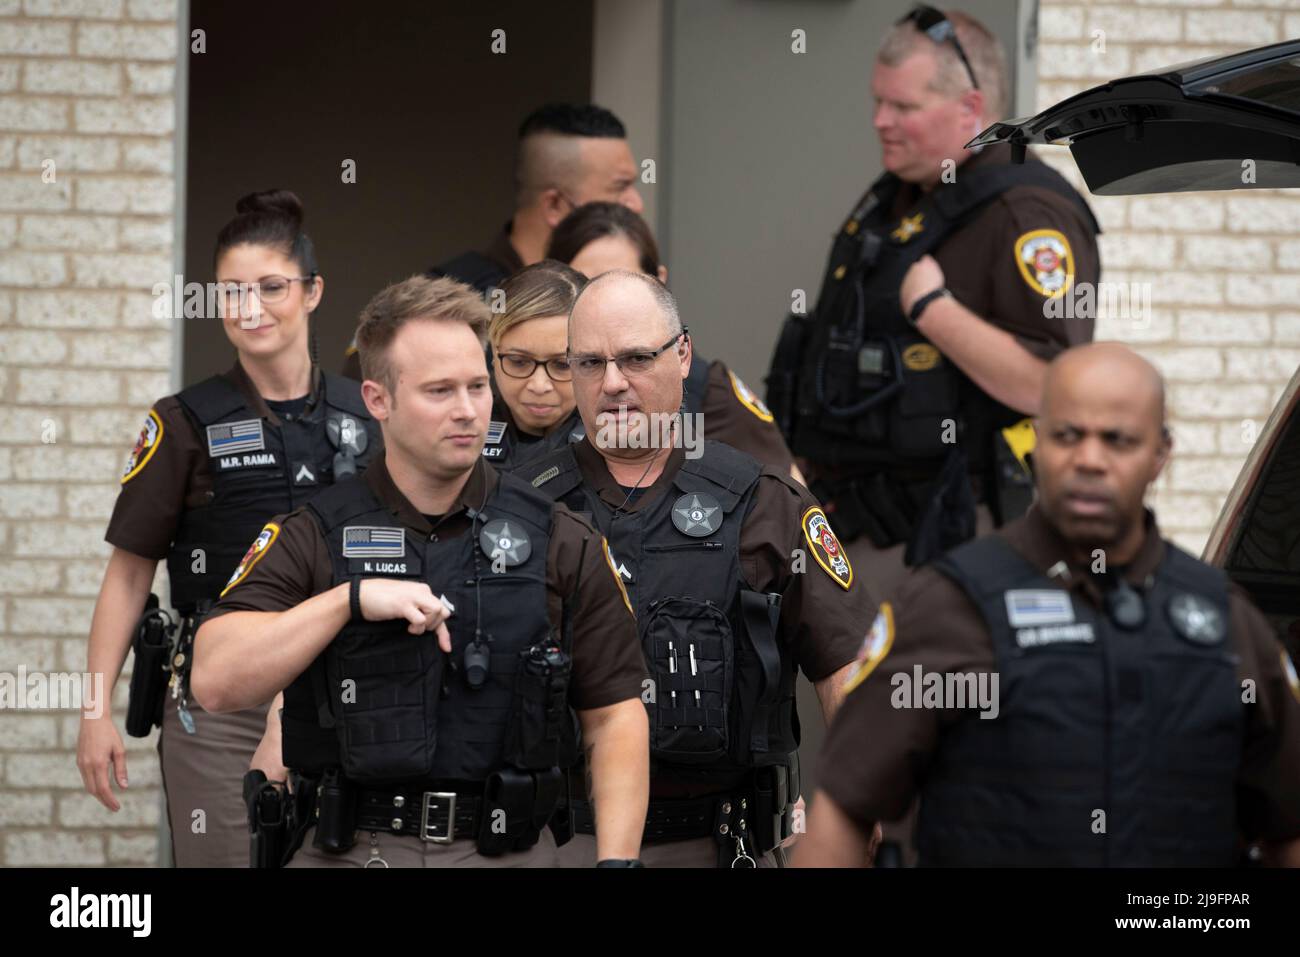 Fairfax County Sheriffs Deputies exit the courthouse to provide crowd control for Johnny Depp and Amber Hearts departure from the Fairfax County Courthouse, in Fairfax, at the close of another day in his civil trial with Amber Heard, Thursday, May 5, 2022. Depp brought a defamation lawsuit against his former wife, actress Amber Heard, after she wrote an op-ed in The Washington Post in 2018 that, without naming Depp, accused him of domestic abuse. Credit: Cliff Owen/CNP (RESTRICTION: NO New York or New Jersey Newspapers or newspapers within a 75 mile radius of New York City) Stock Photo